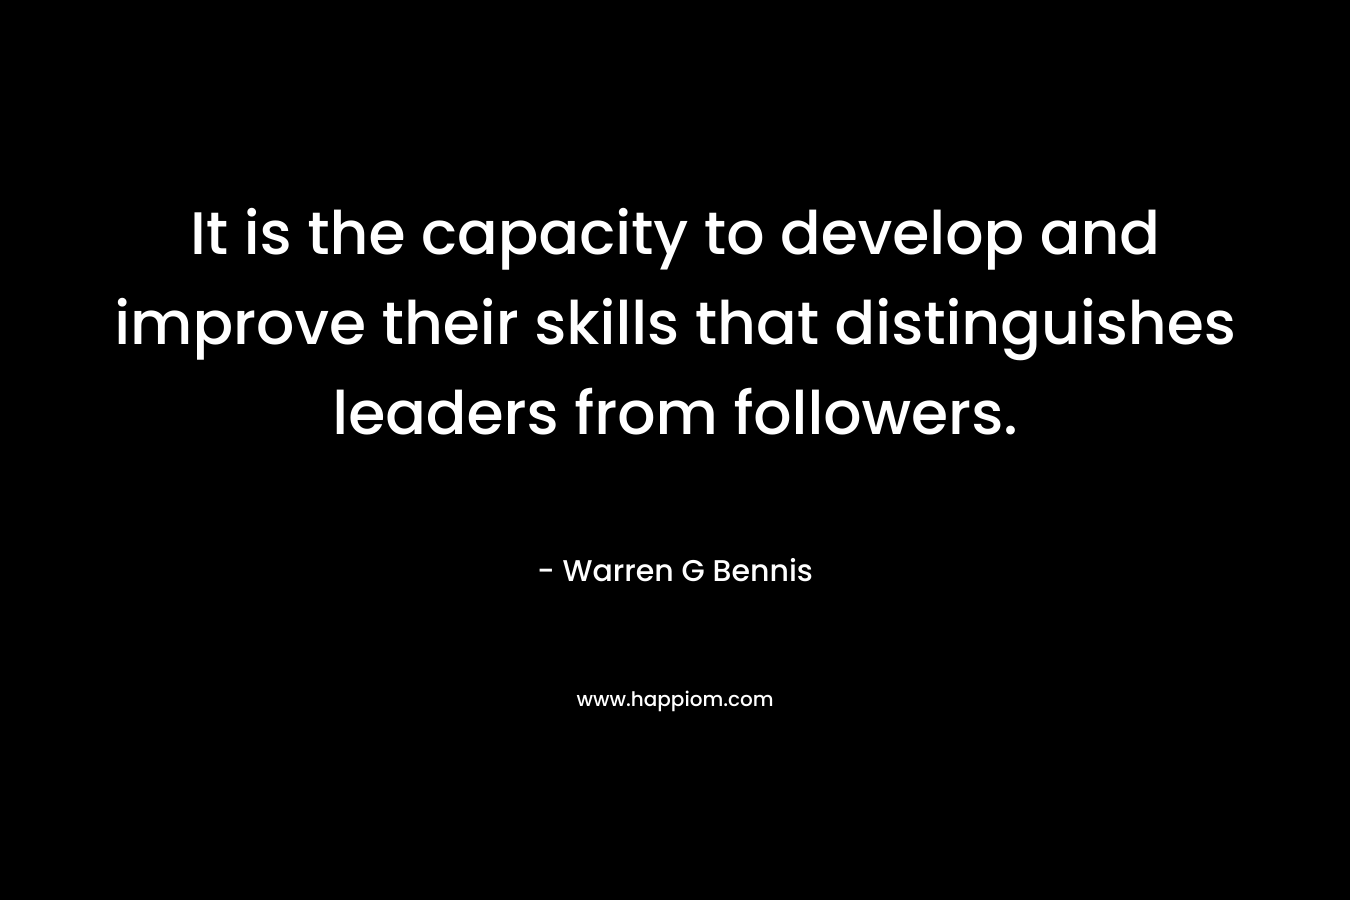 It is the capacity to develop and improve their skills that distinguishes leaders from followers. – Warren G Bennis